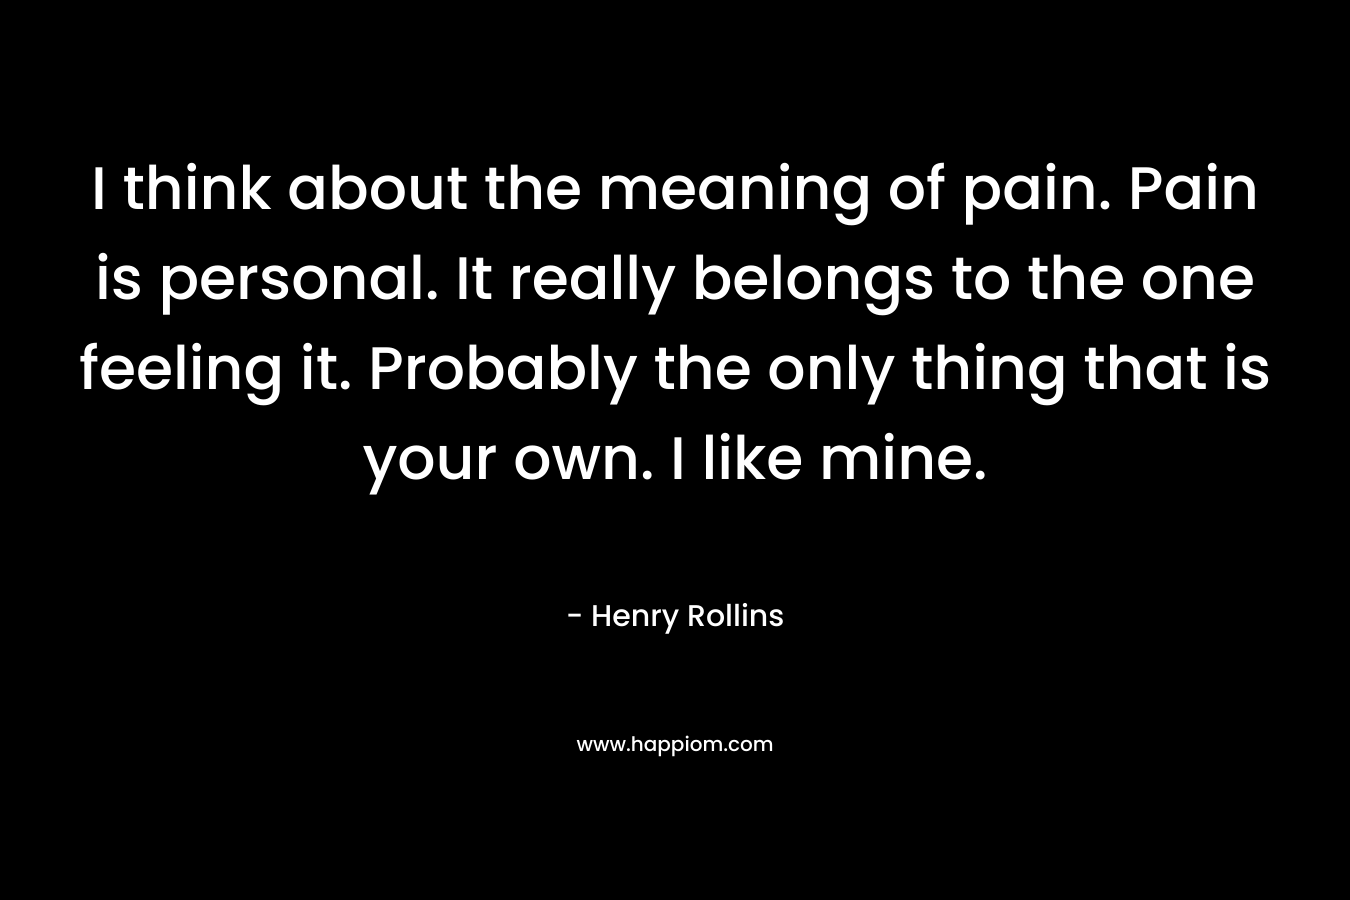 I think about the meaning of pain. Pain is personal. It really belongs to the one feeling it. Probably the only thing that is your own. I like mine. – Henry Rollins